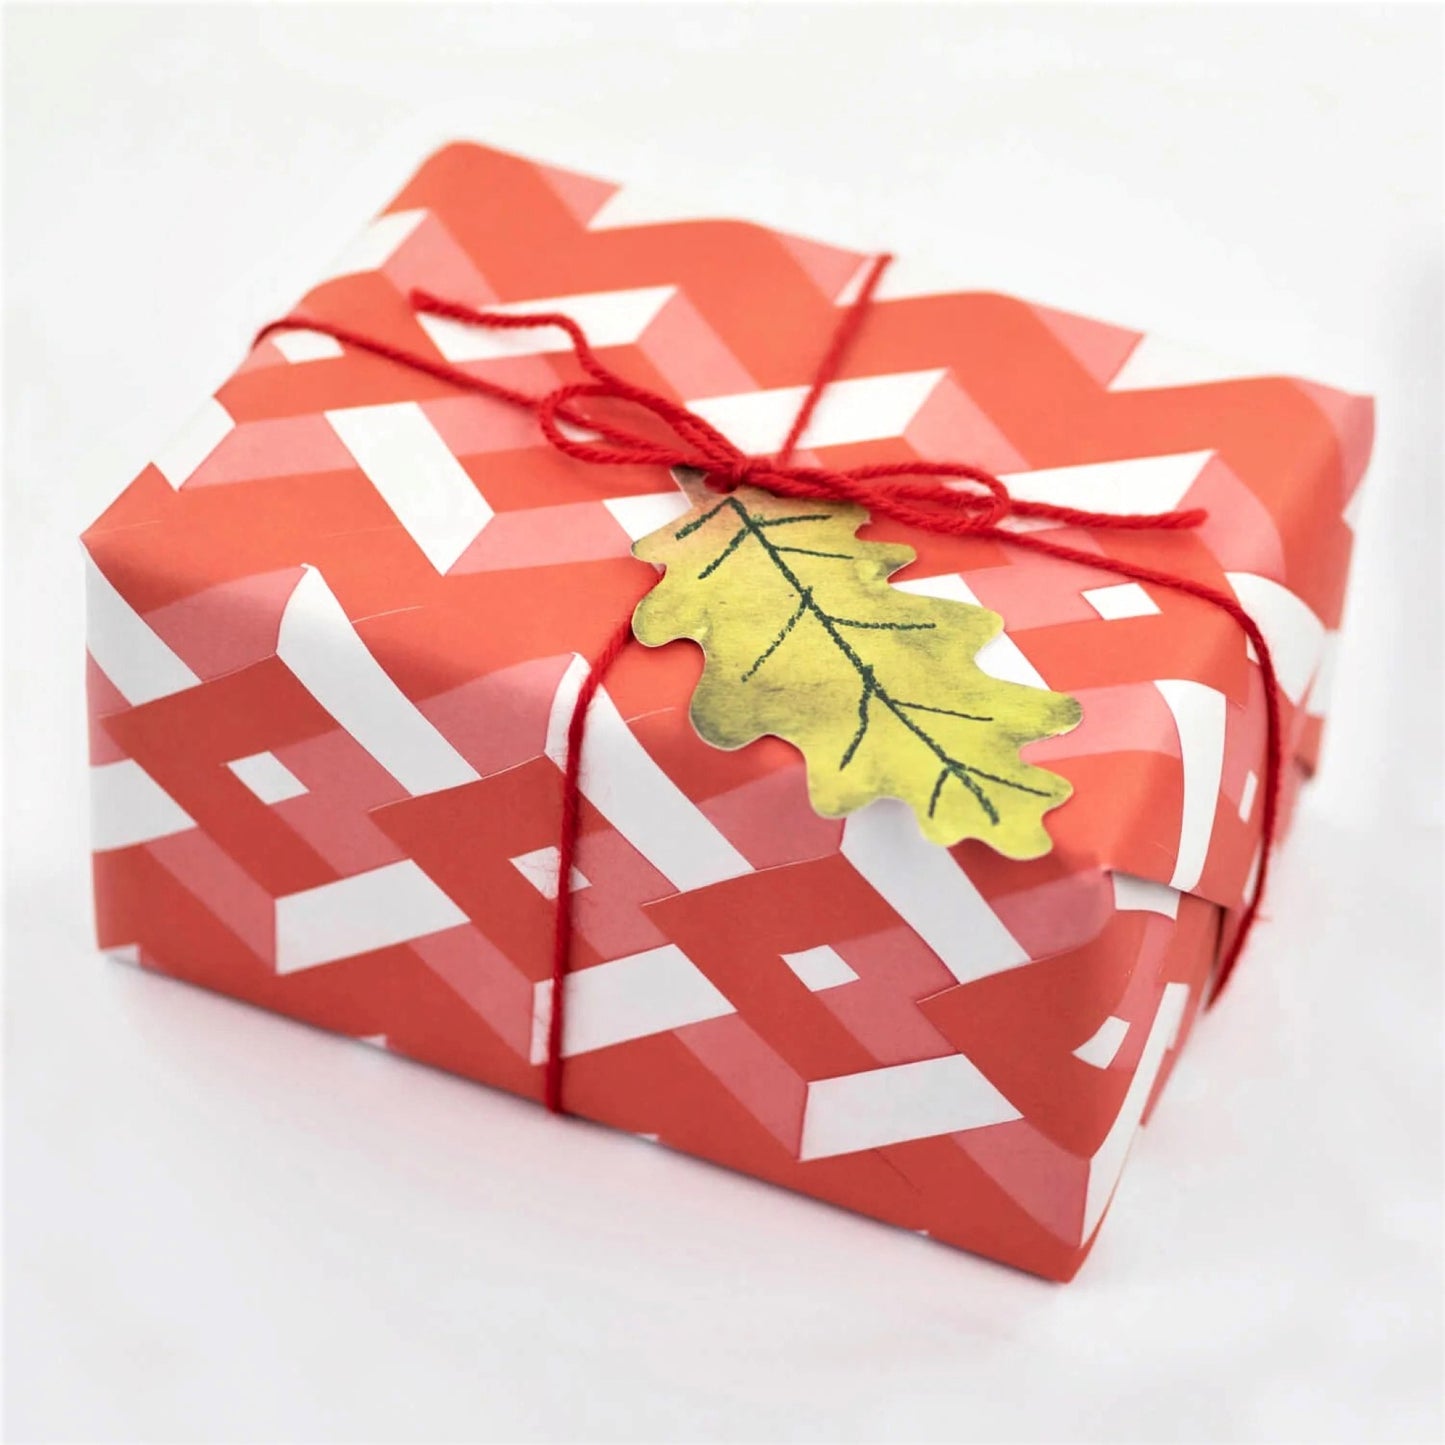 red and pink diamond design gift wrap by Hadley Paper Goods, wrapped as a present